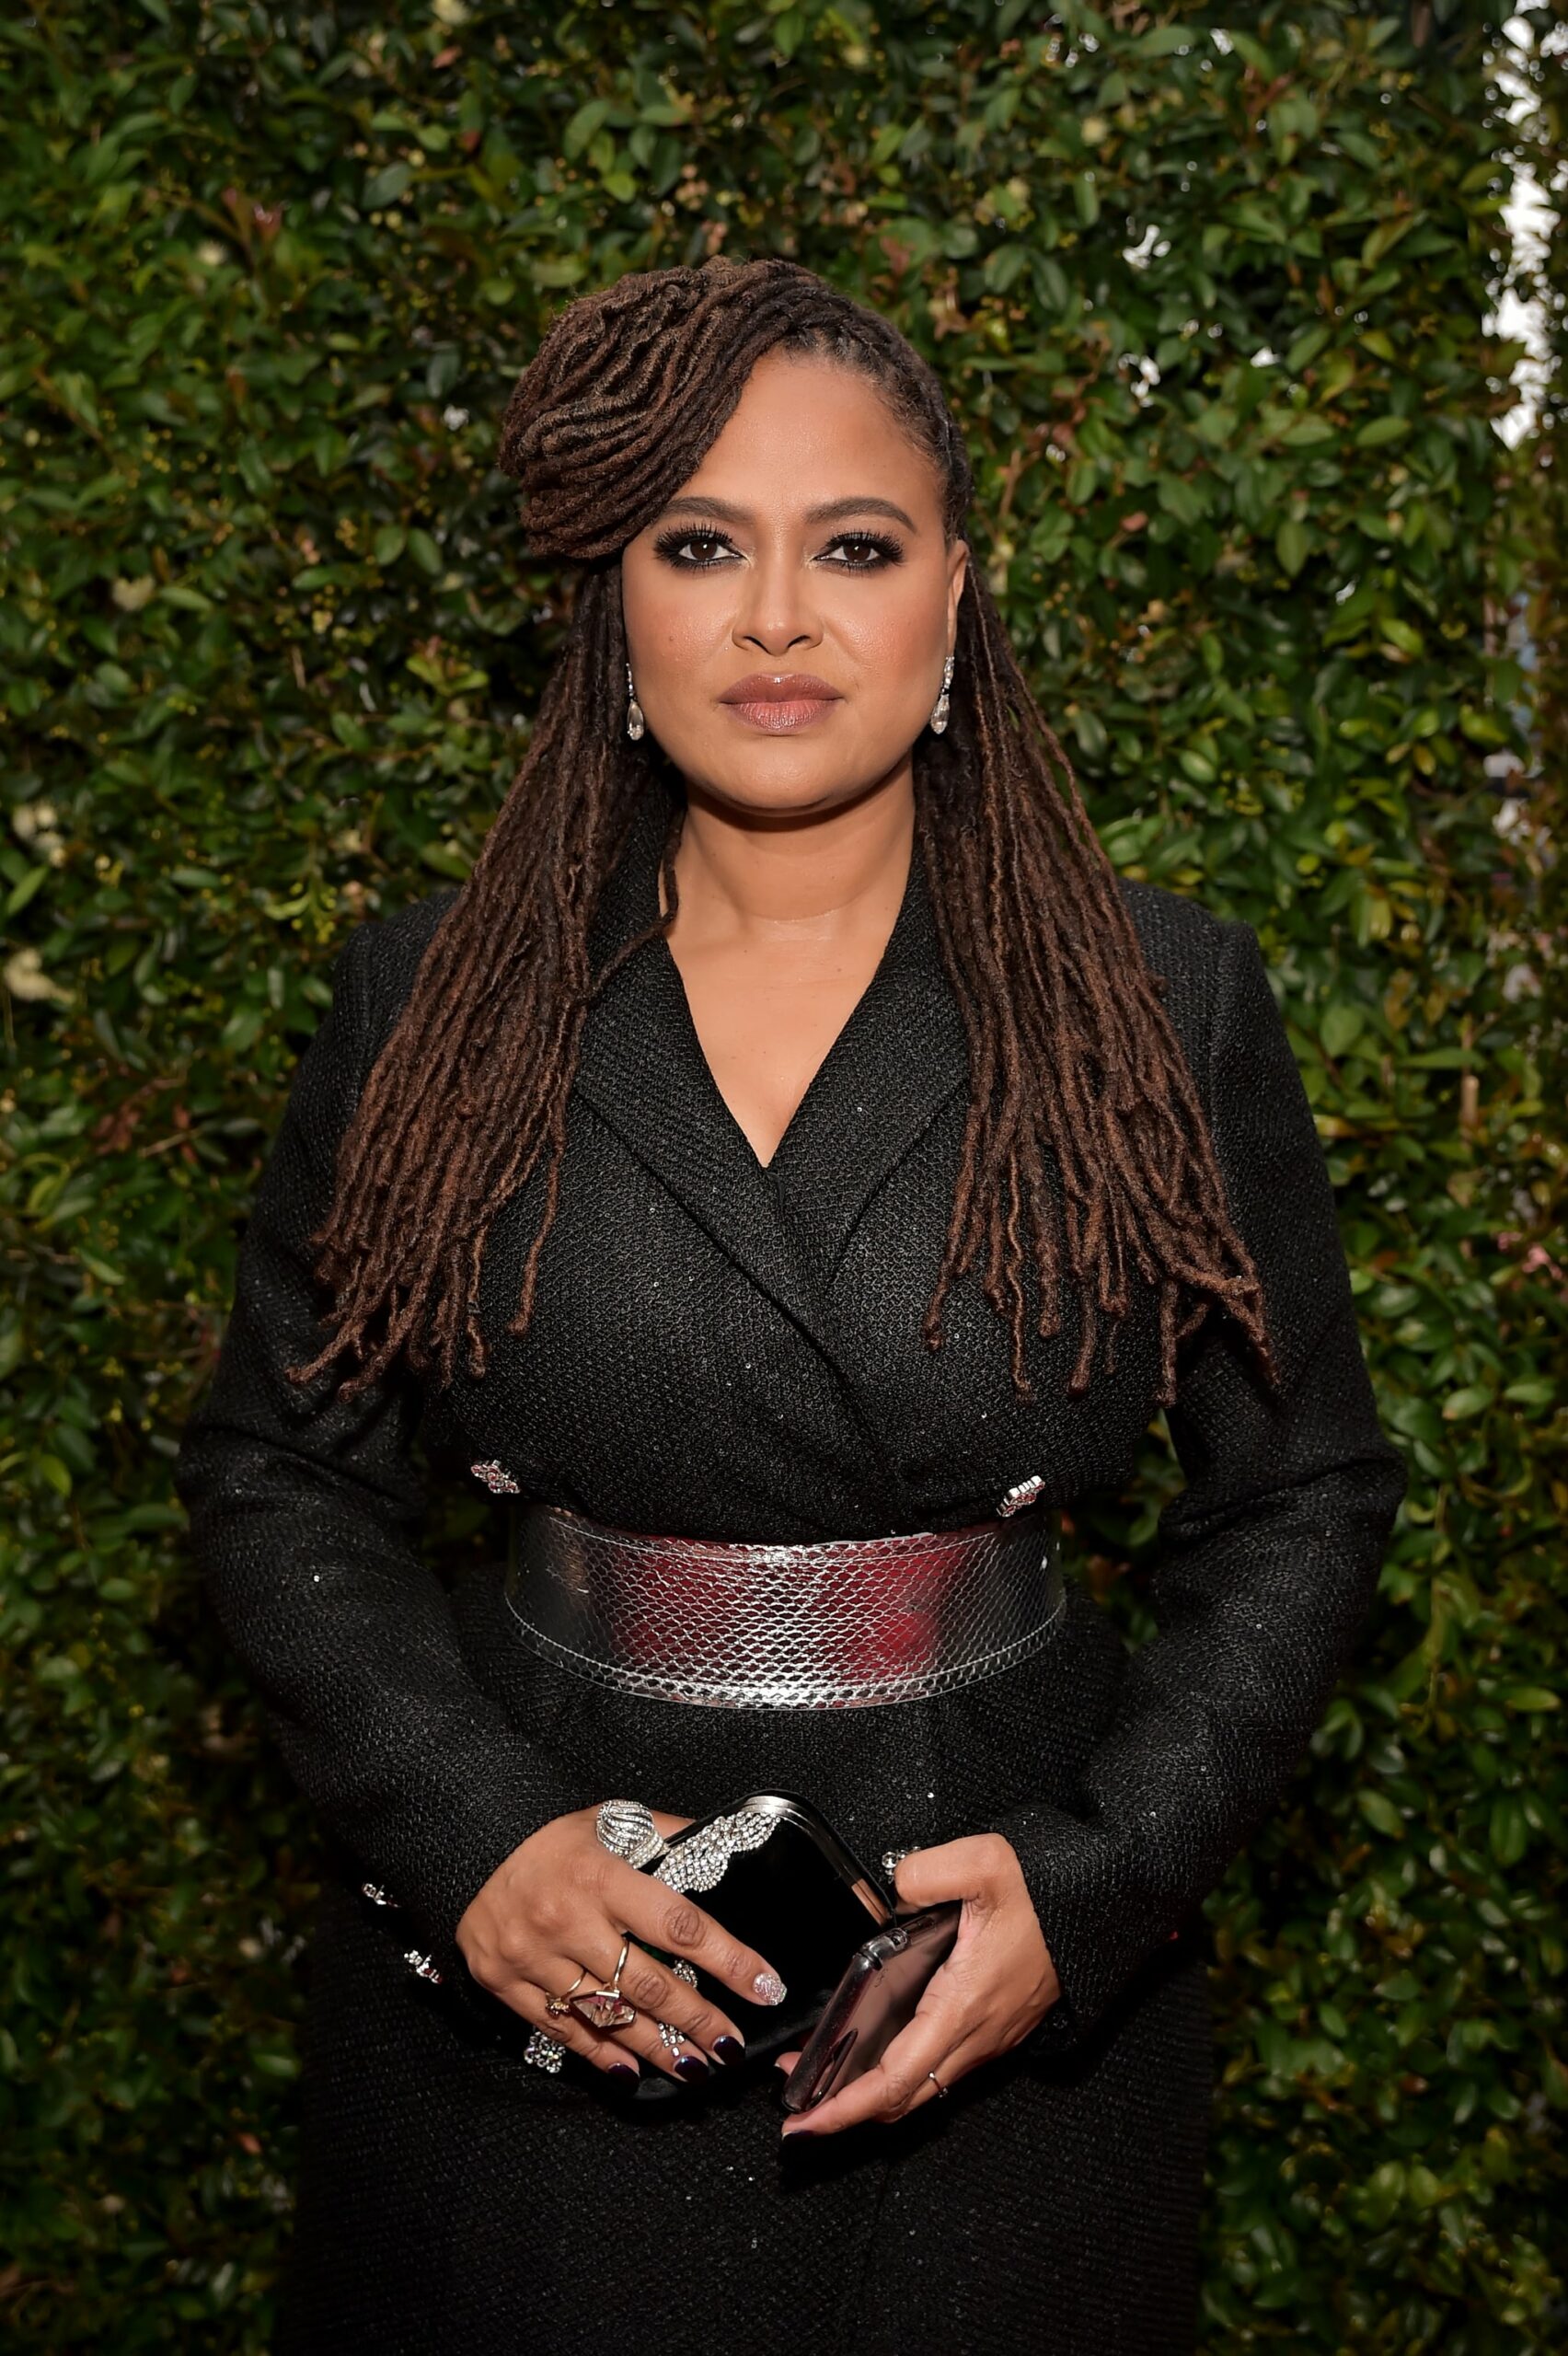 HOLLYWOOD, CALIFORNIA - JUNE 06:  Ava DuVernay attends Audi Presents The 47th AFI Life Achievement Award Gala on June 06, 2019 in Hollywood, California. (Photo by Stefanie Keenan/Getty Images for Audi)